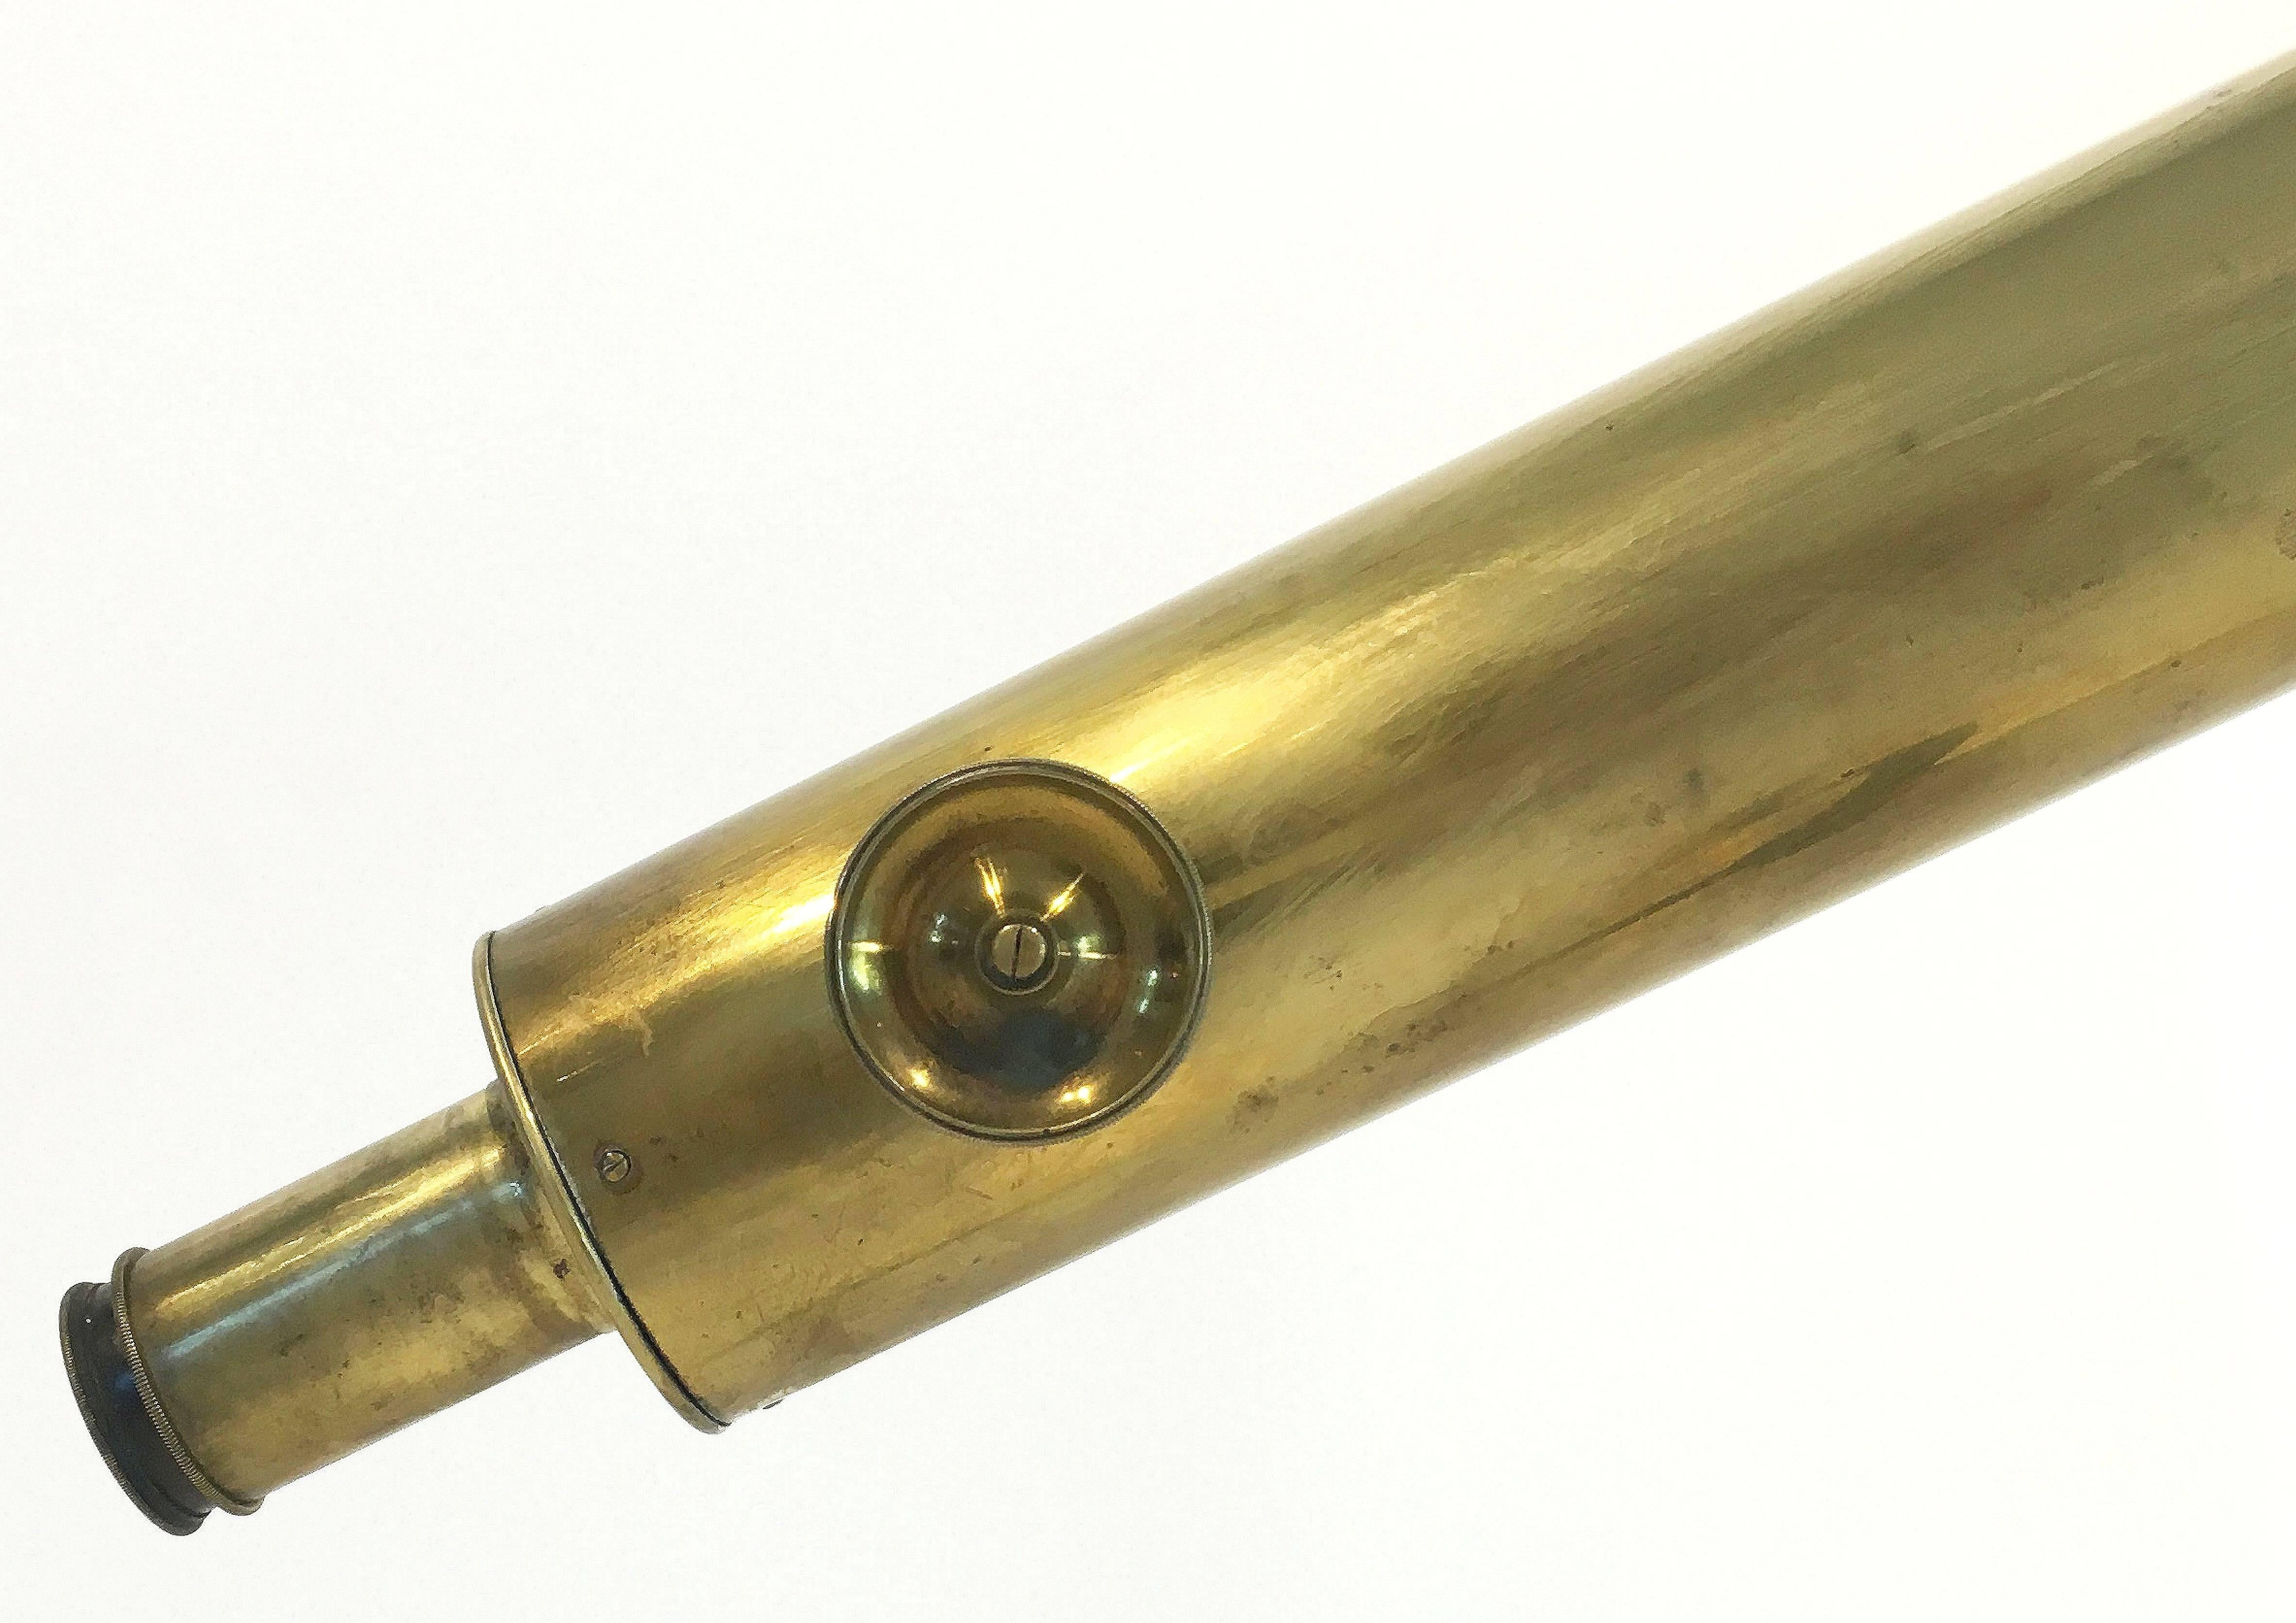 A fine large Scottish working library telescope of brass, from the 19th century, for terrestrial or astronomical use. Featuring a primary barrel with a fine focusing wheel and eye tubes for different magnifications, with a single red-tinted filter